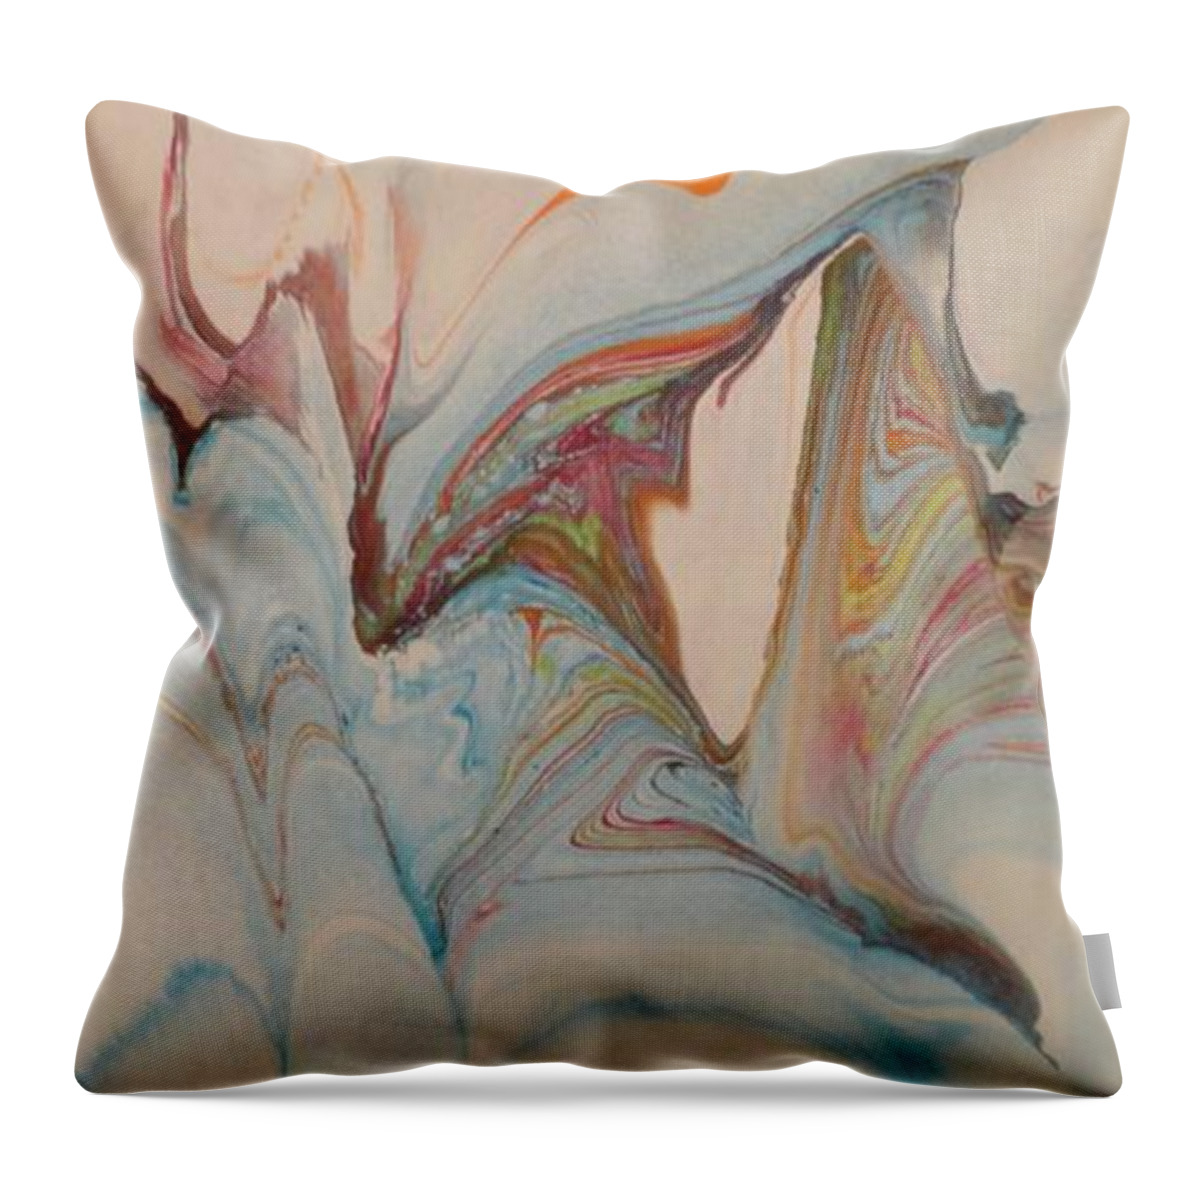 Marbling Art Throw Pillow featuring the painting Marble 24 by Mike Breau